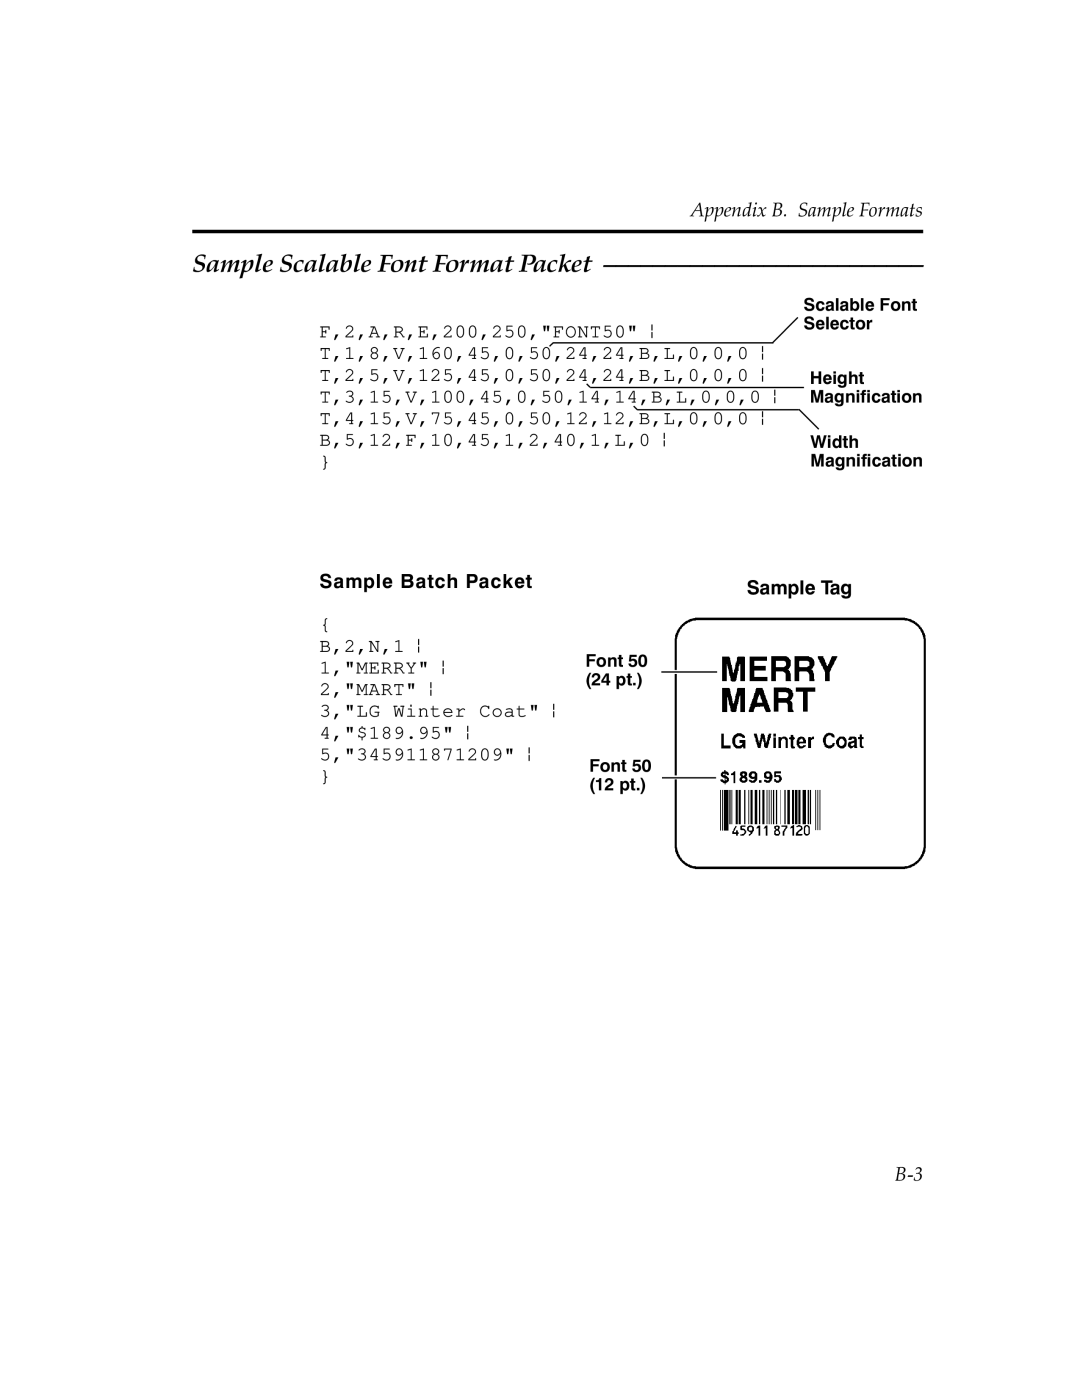 Paxar MPCL II manual Sample Scalable Font Format Packet, Appendix B. Sample Formats, Sample Batch Packet 